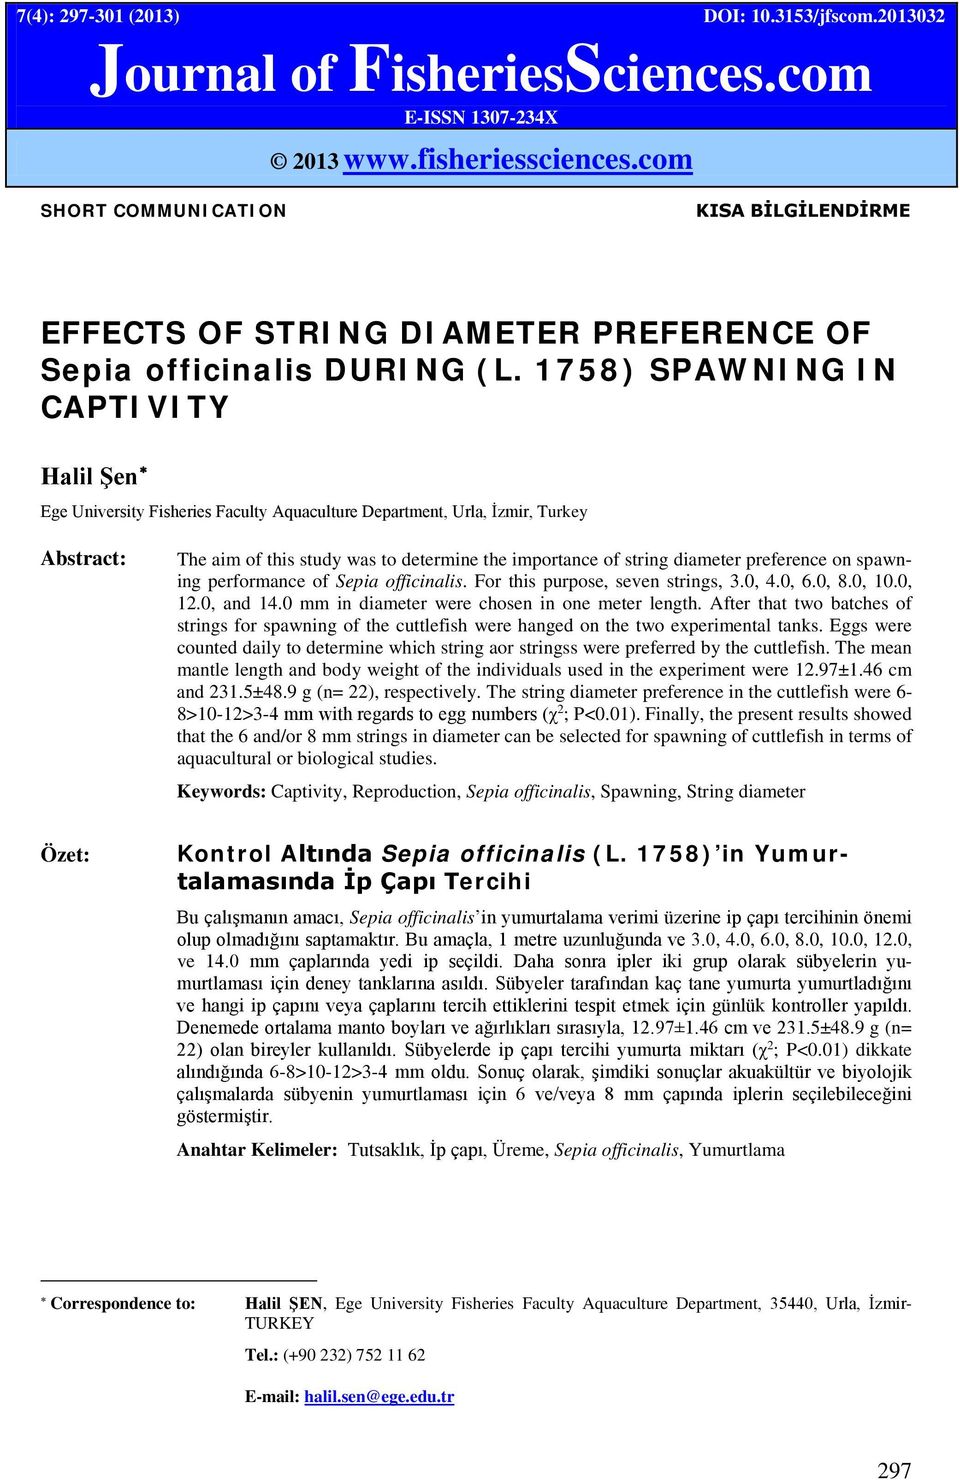 1758) SPAWNING IN CAPTIVITY Halil Şen Ege University Fisheries Faculty Aquaculture Department, Urla, İzmir, Turkey Abstract: The aim of this study was to determine the importance of string diameter